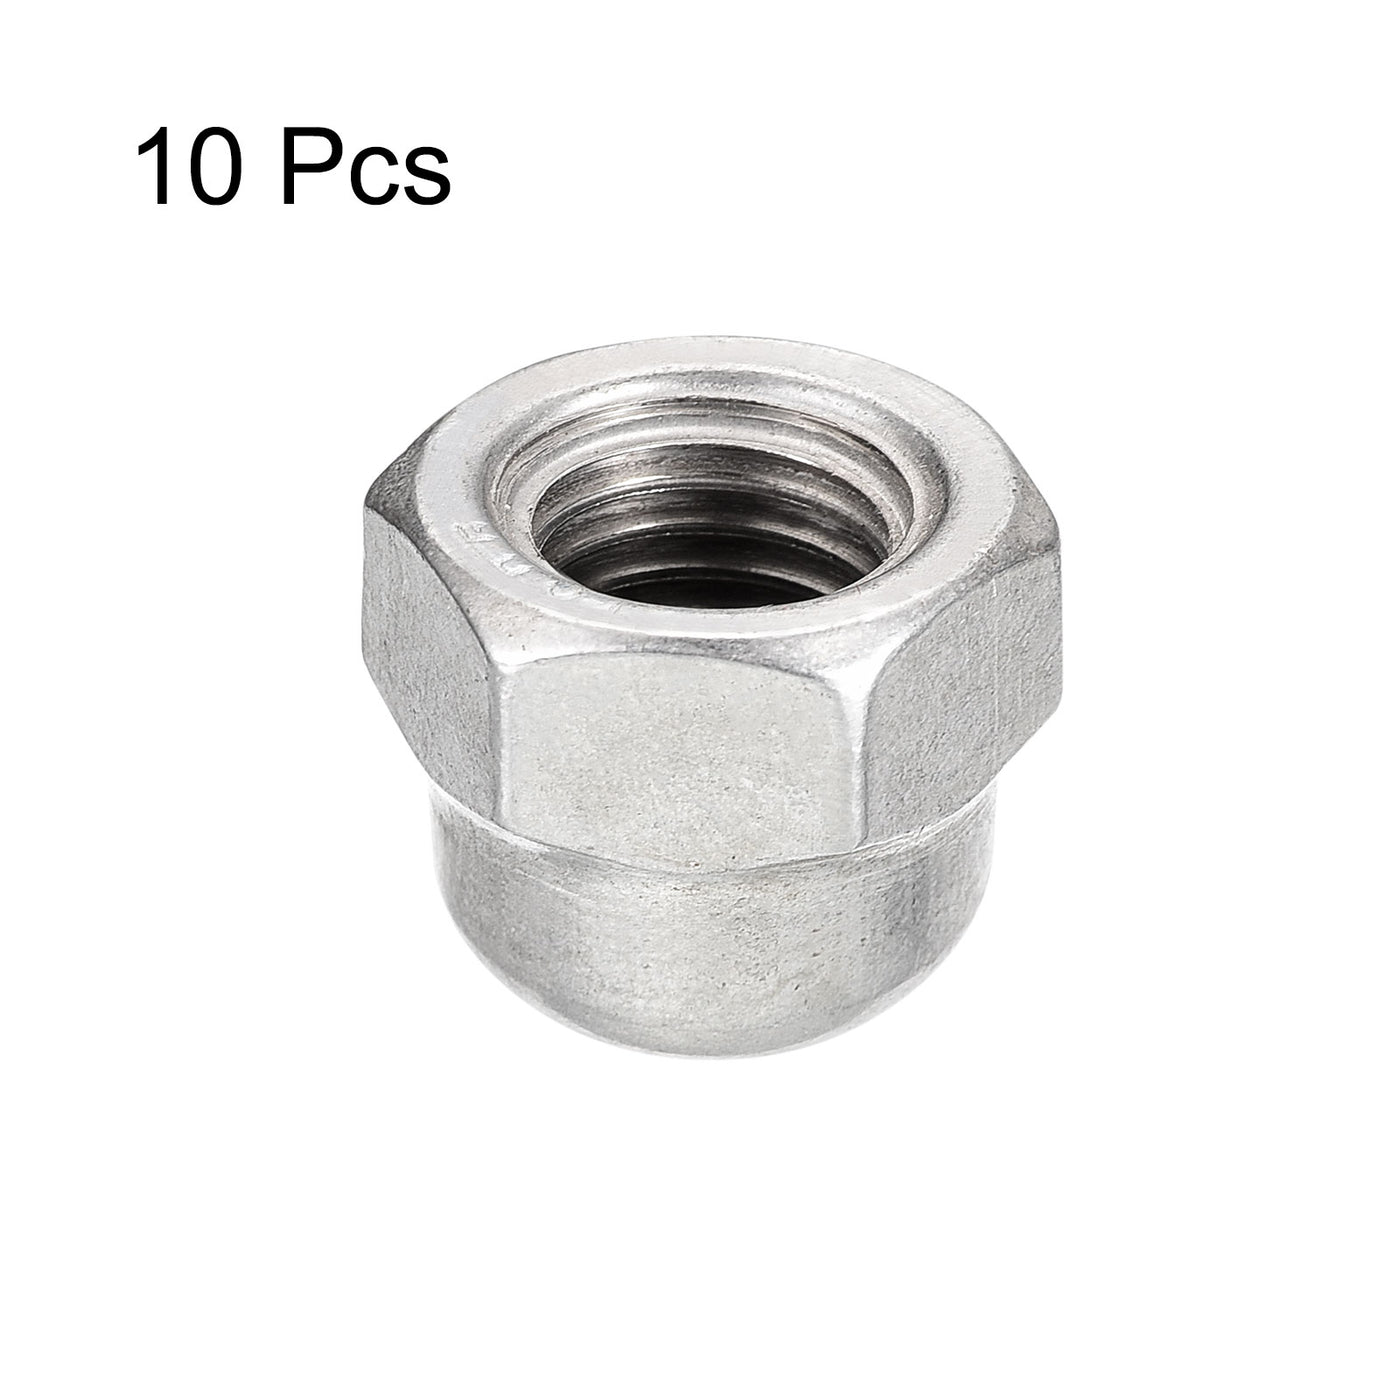 uxcell Uxcell 5/16-18 Acorn Cap Nuts,10pcs - 304 Stainless Steel Hardware Nuts, Acorn Hex Cap Dome Head Nuts for Fasteners (Silver)